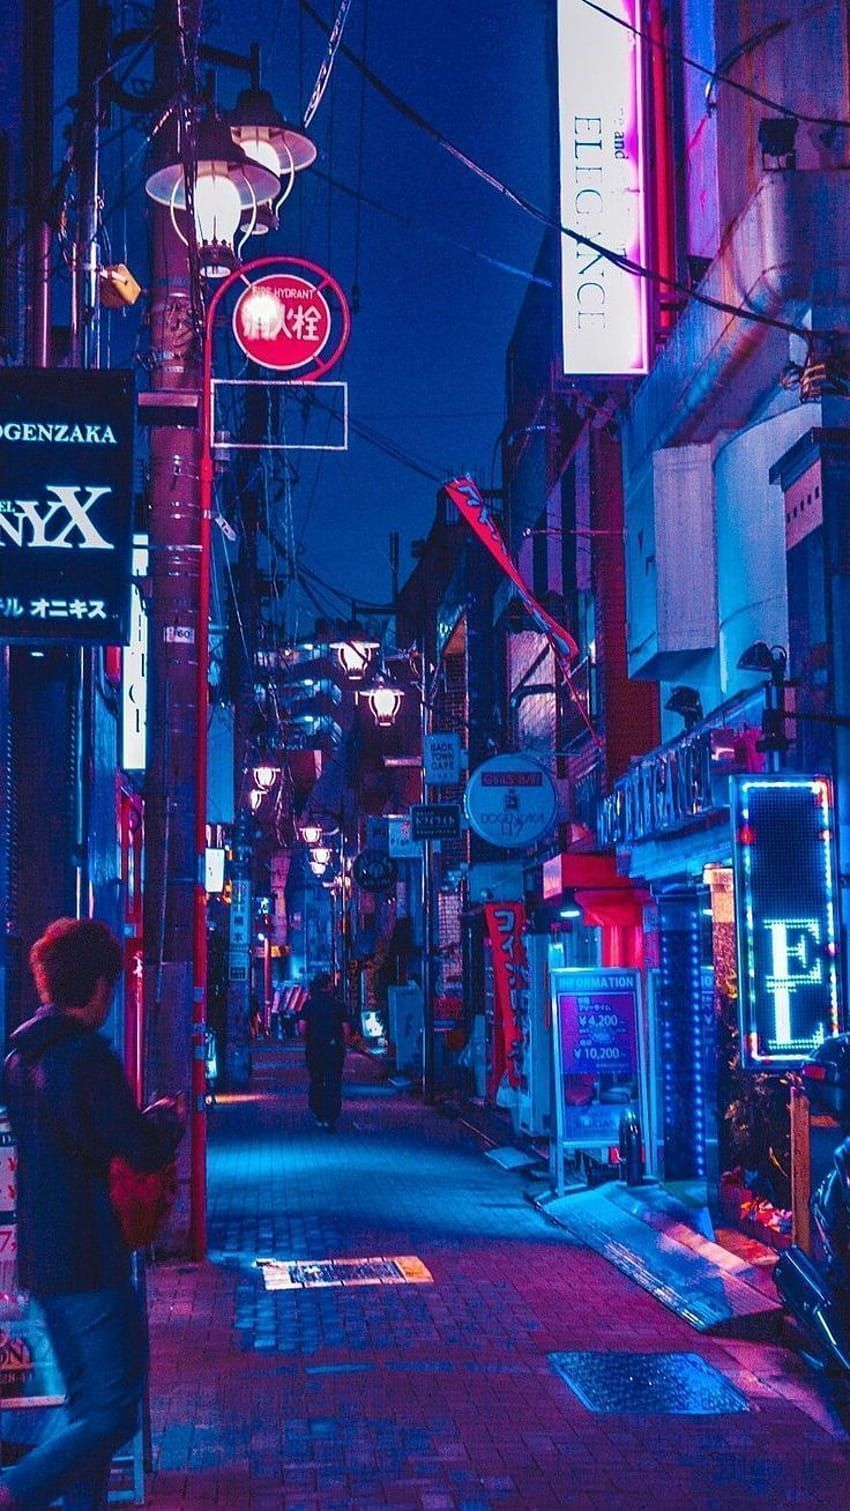 A person walking down an alley at night - Seoul